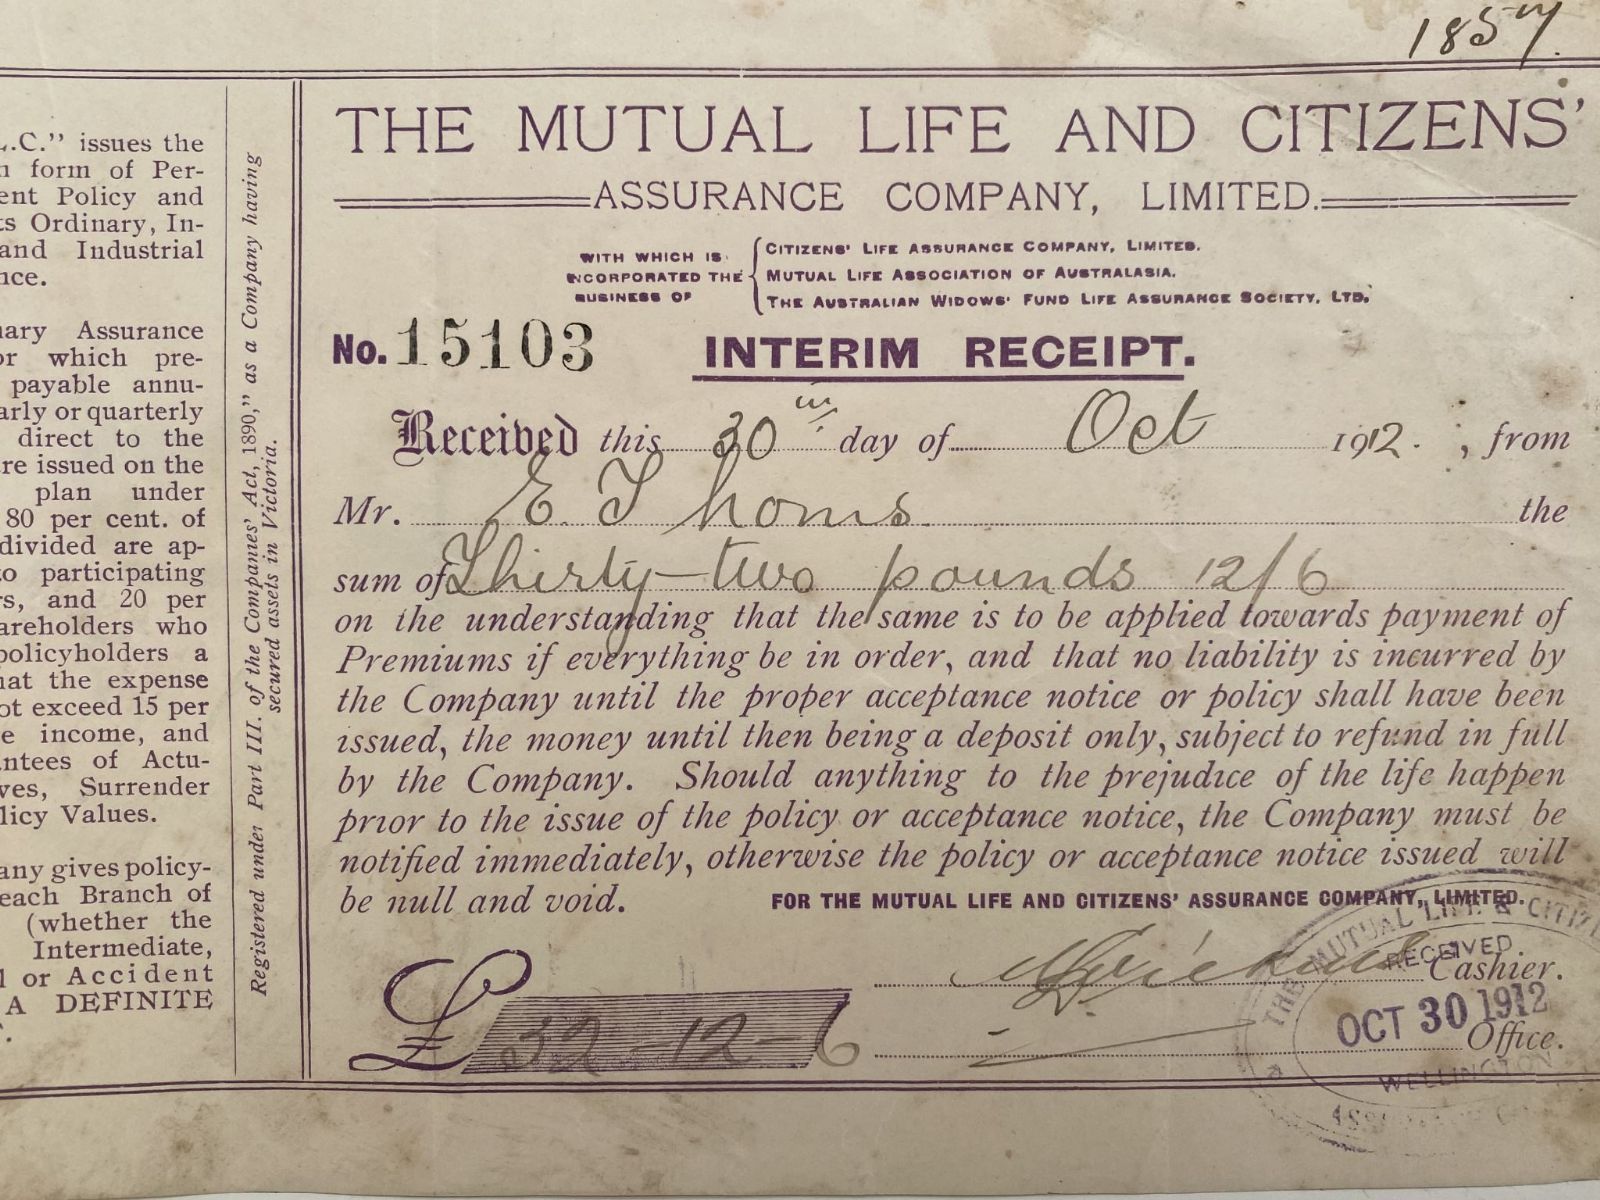 ANTIQUE INVOICE / RECEIPT: The Mutual Life and Citizens’ Assurance Co. 1912